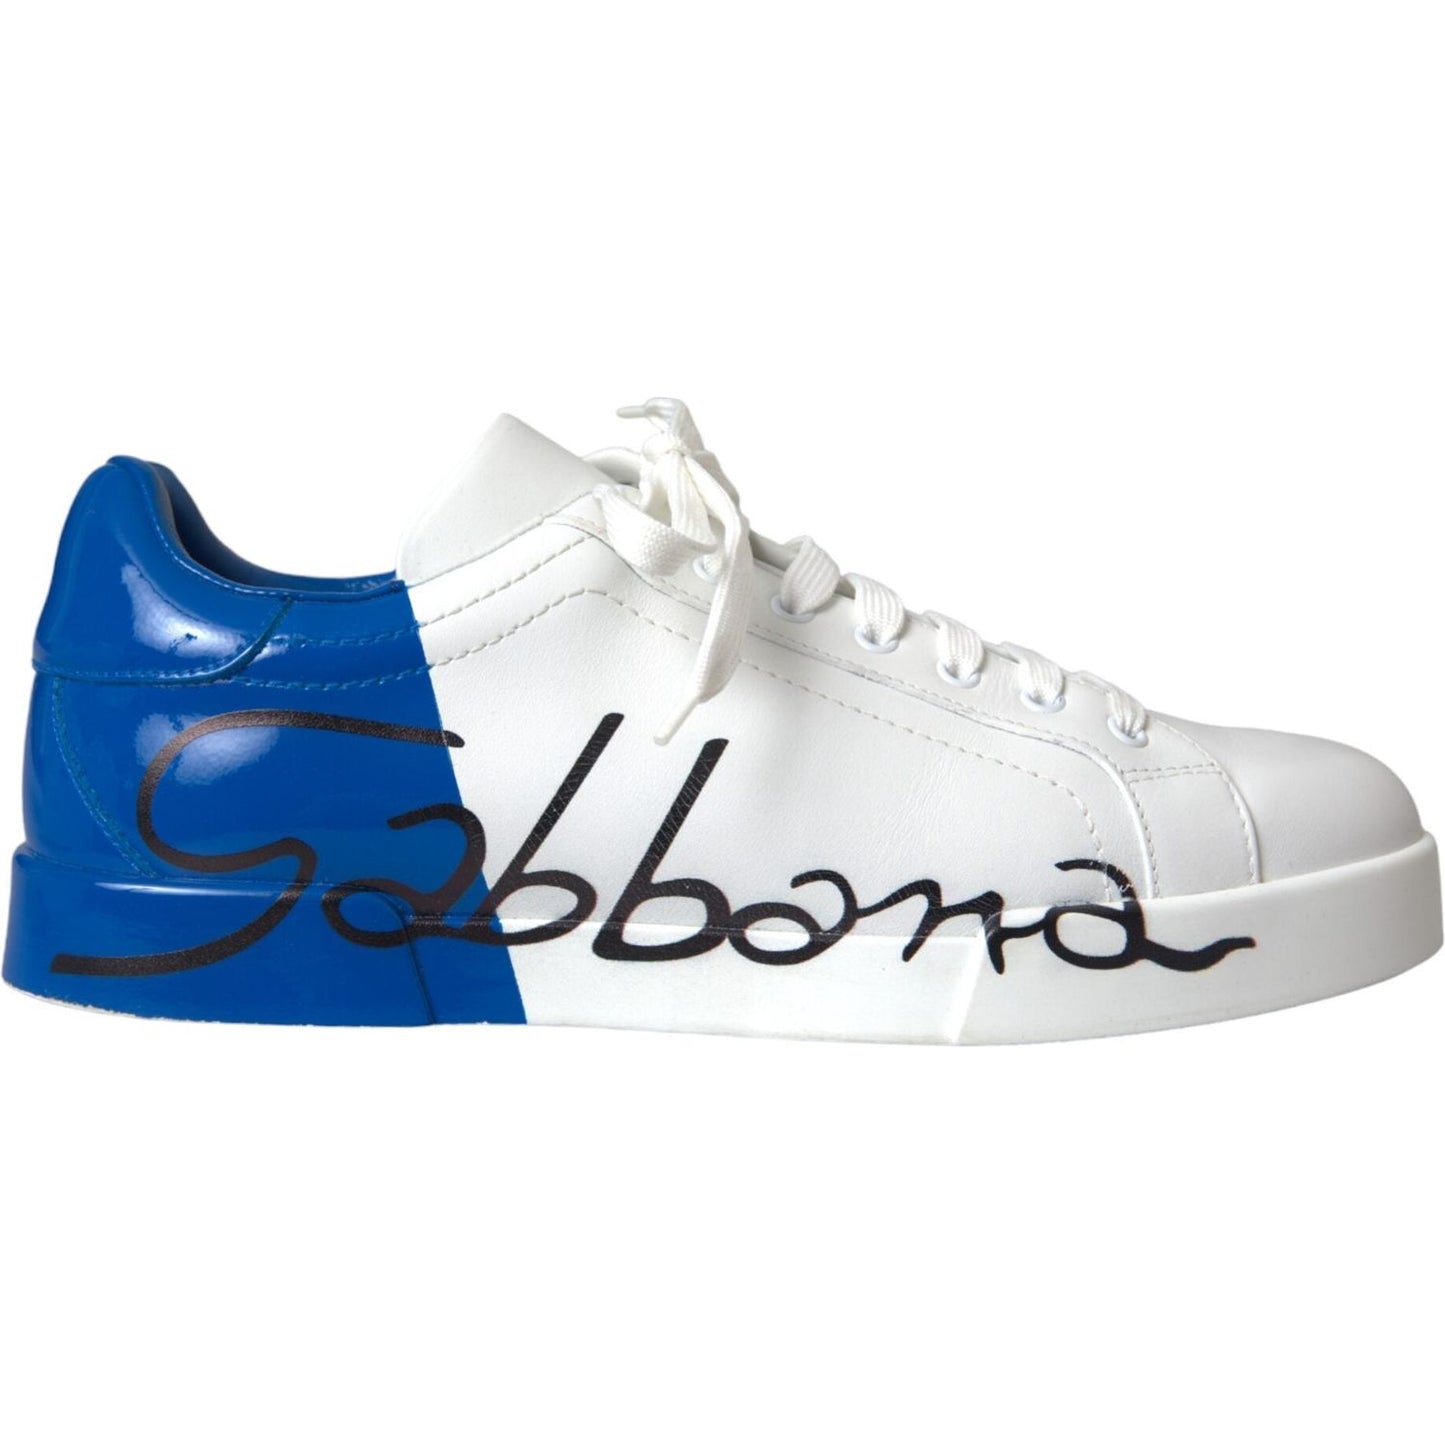 White Blue Leather Logo Low Top Sneakers Men Shoes